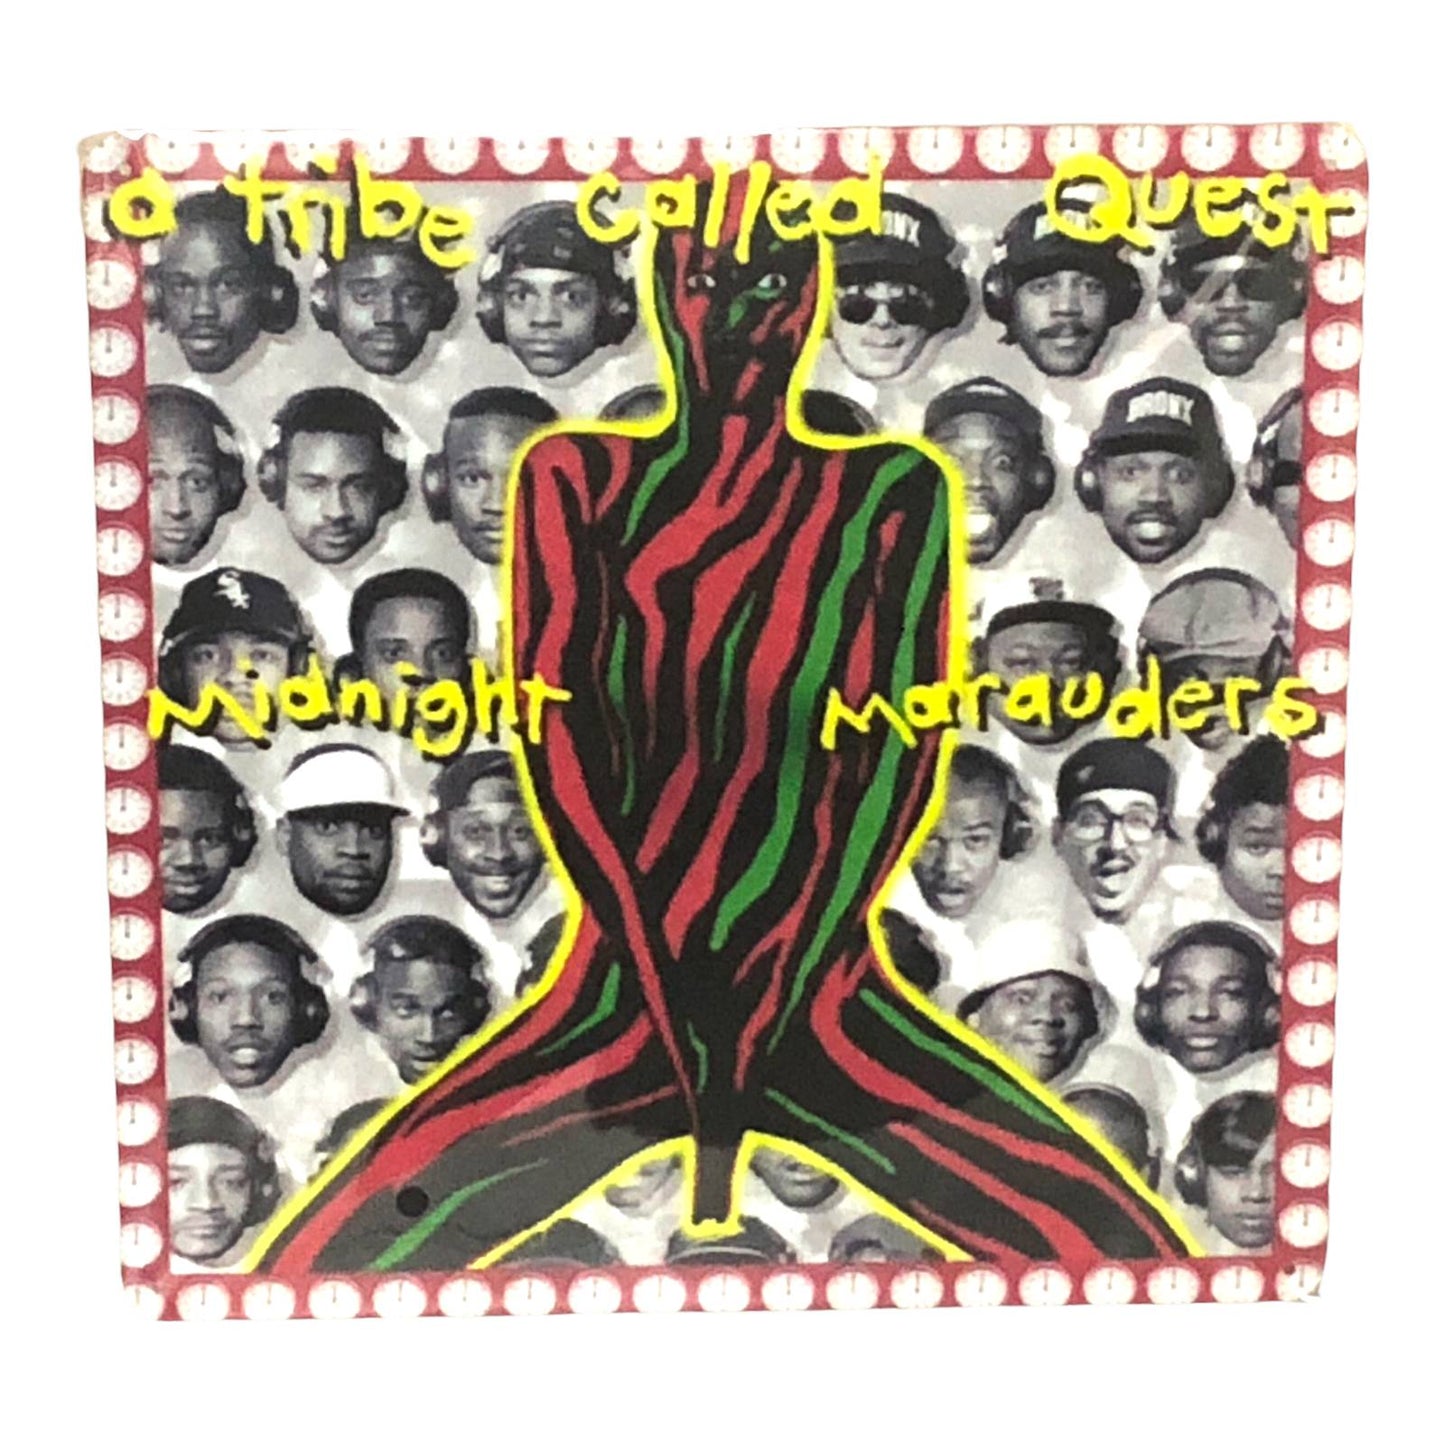 A Tribe Called Quest - Midnight Marauders Album Cover Metal Print Tin Sign 12"x 12"